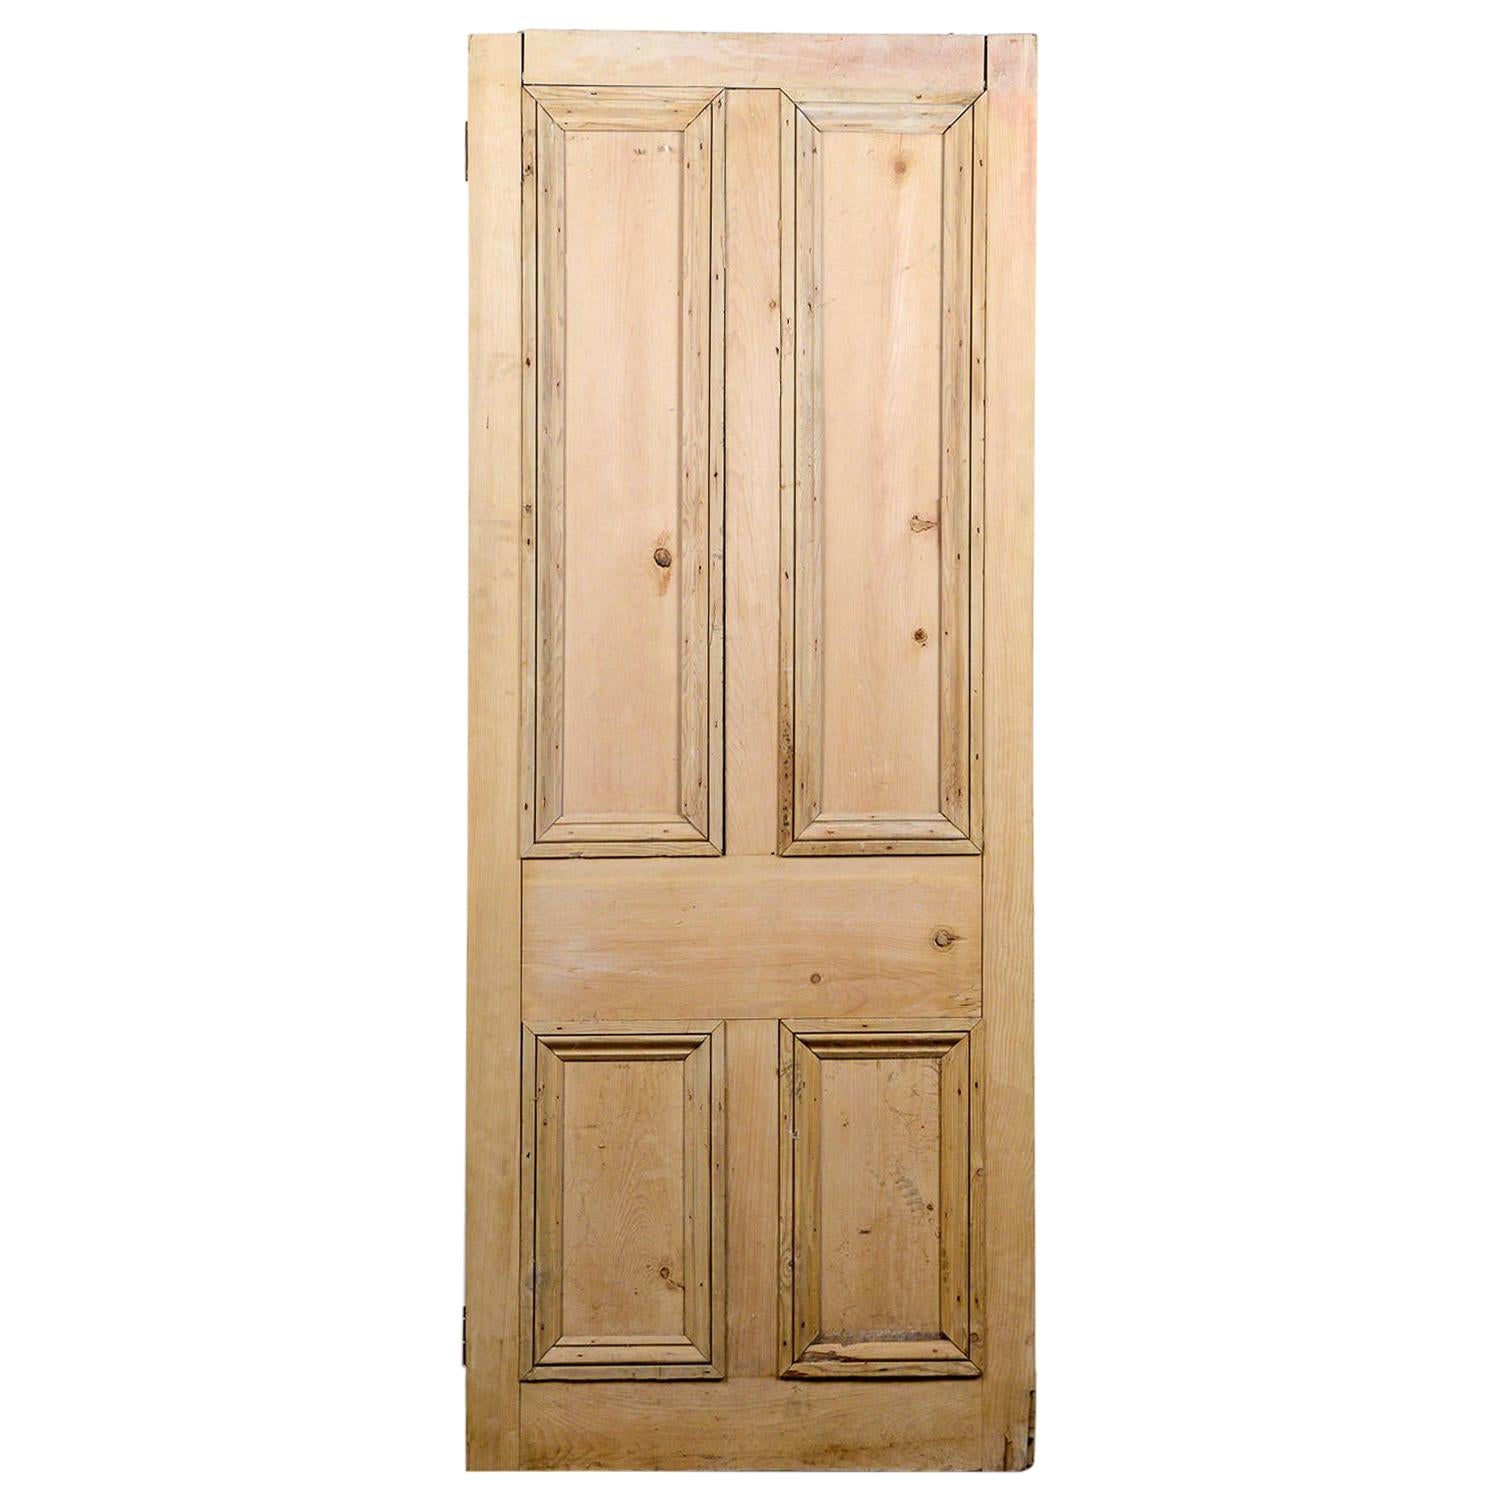 Victorian 4 Beaded Panel Stripped Pine Door, 20th Century For Sale